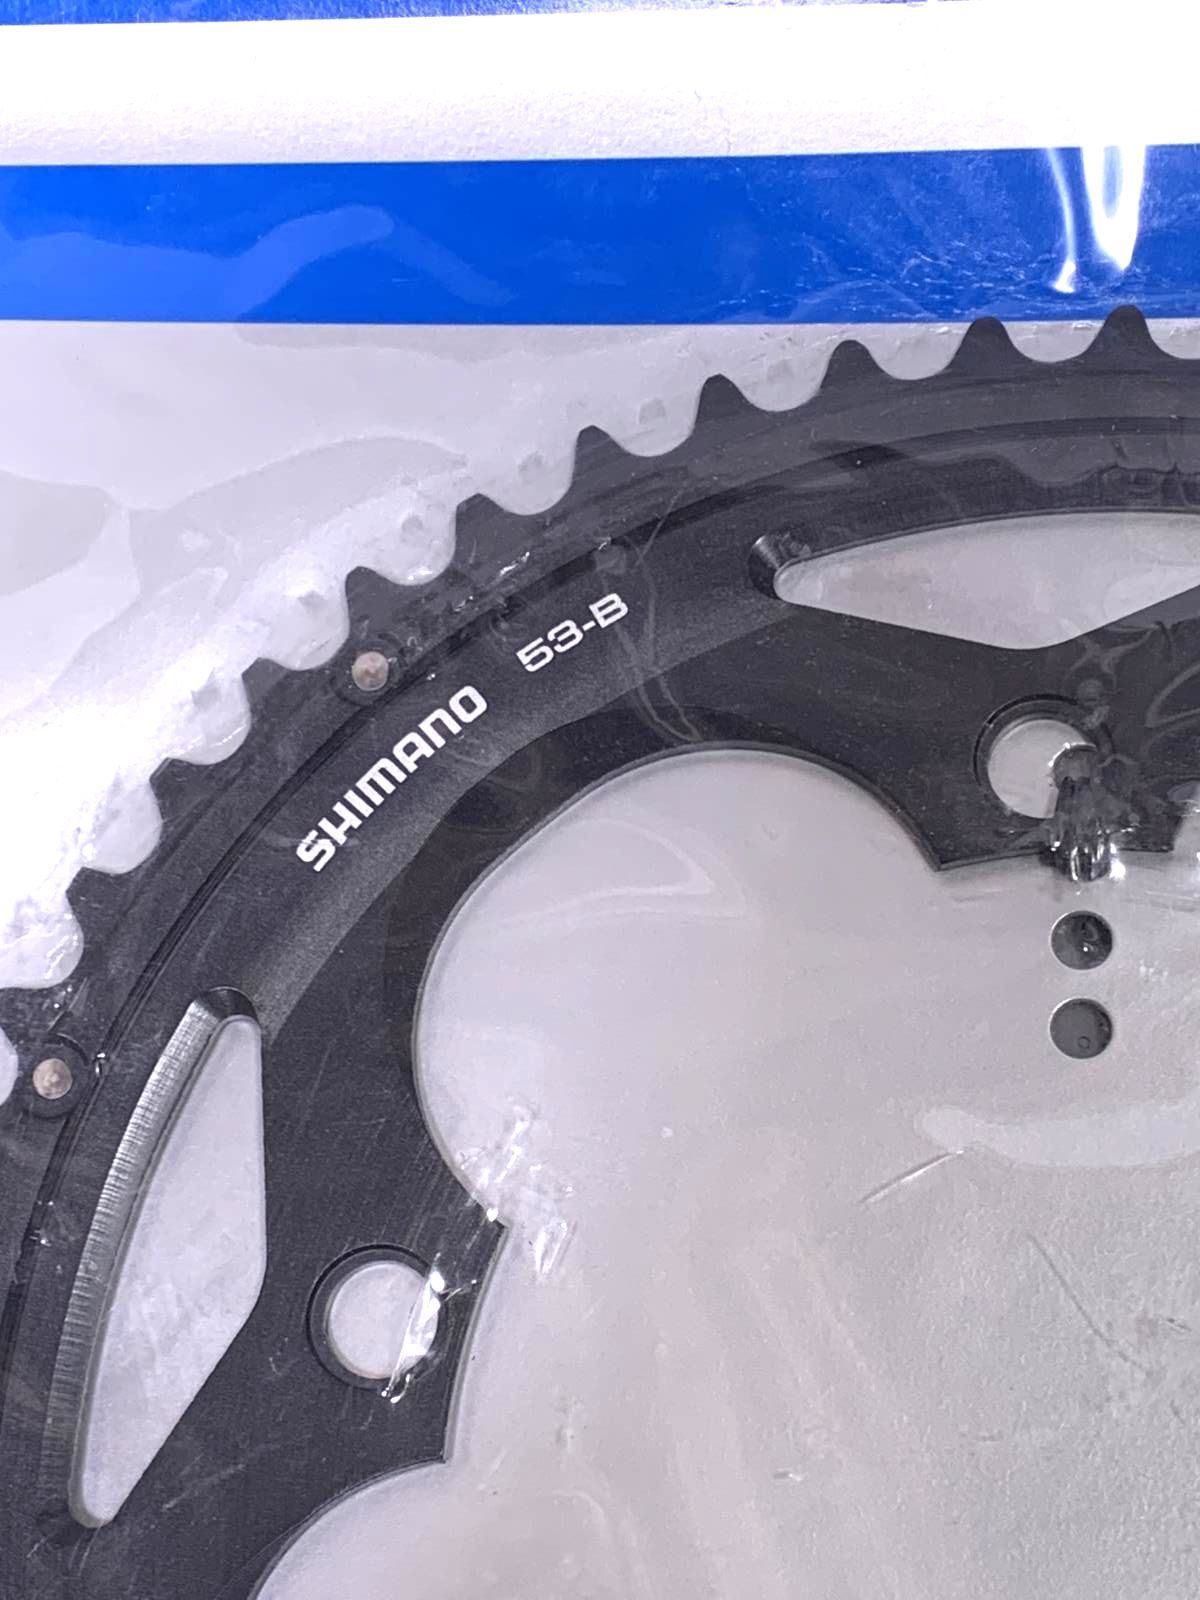 Shimano 105 FC-5700L 53T 10 Speed Bike Chainring 130mm BCD New